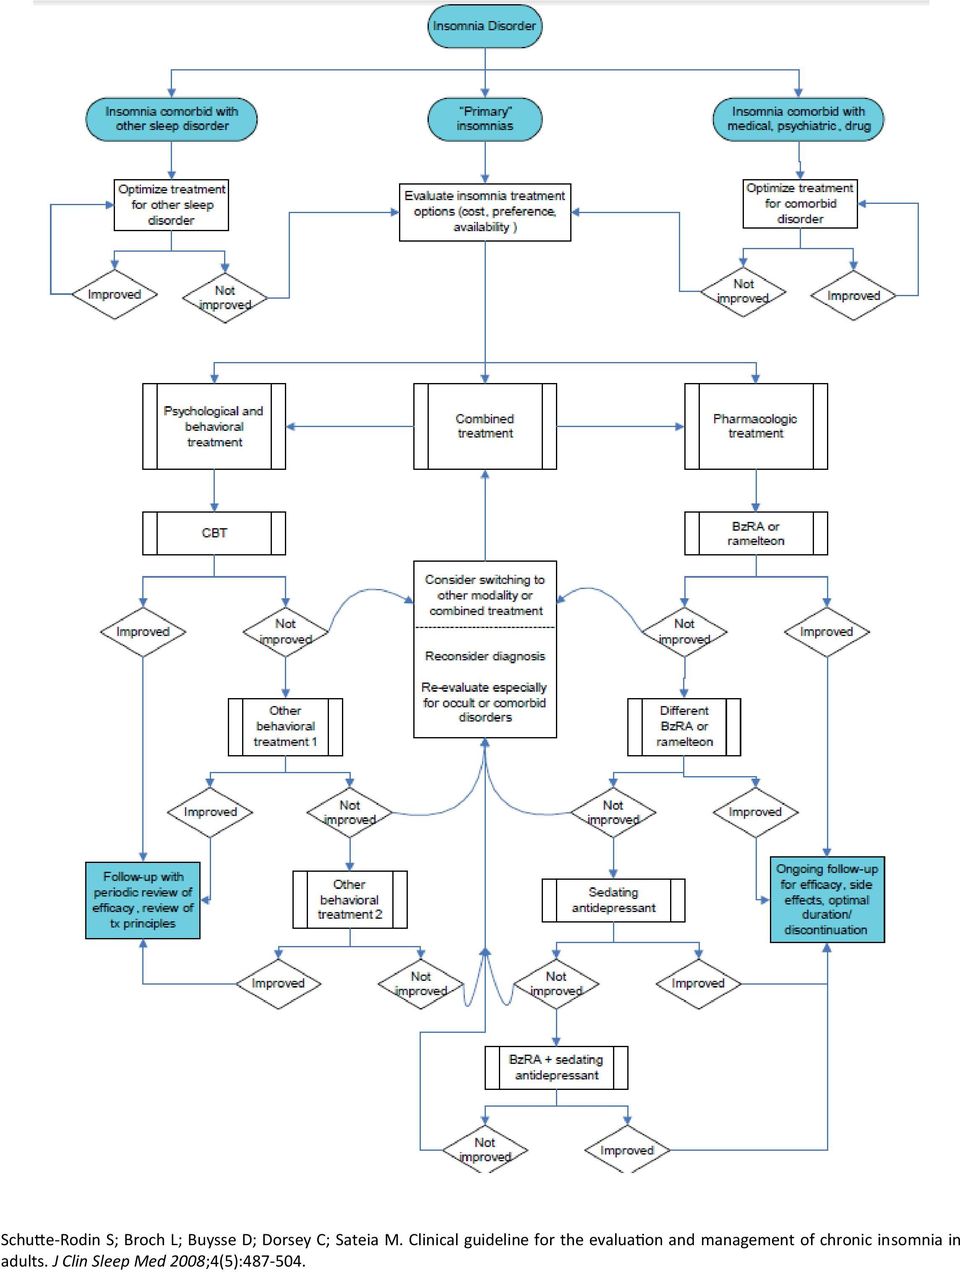 Clinical guideline for the evaluation and